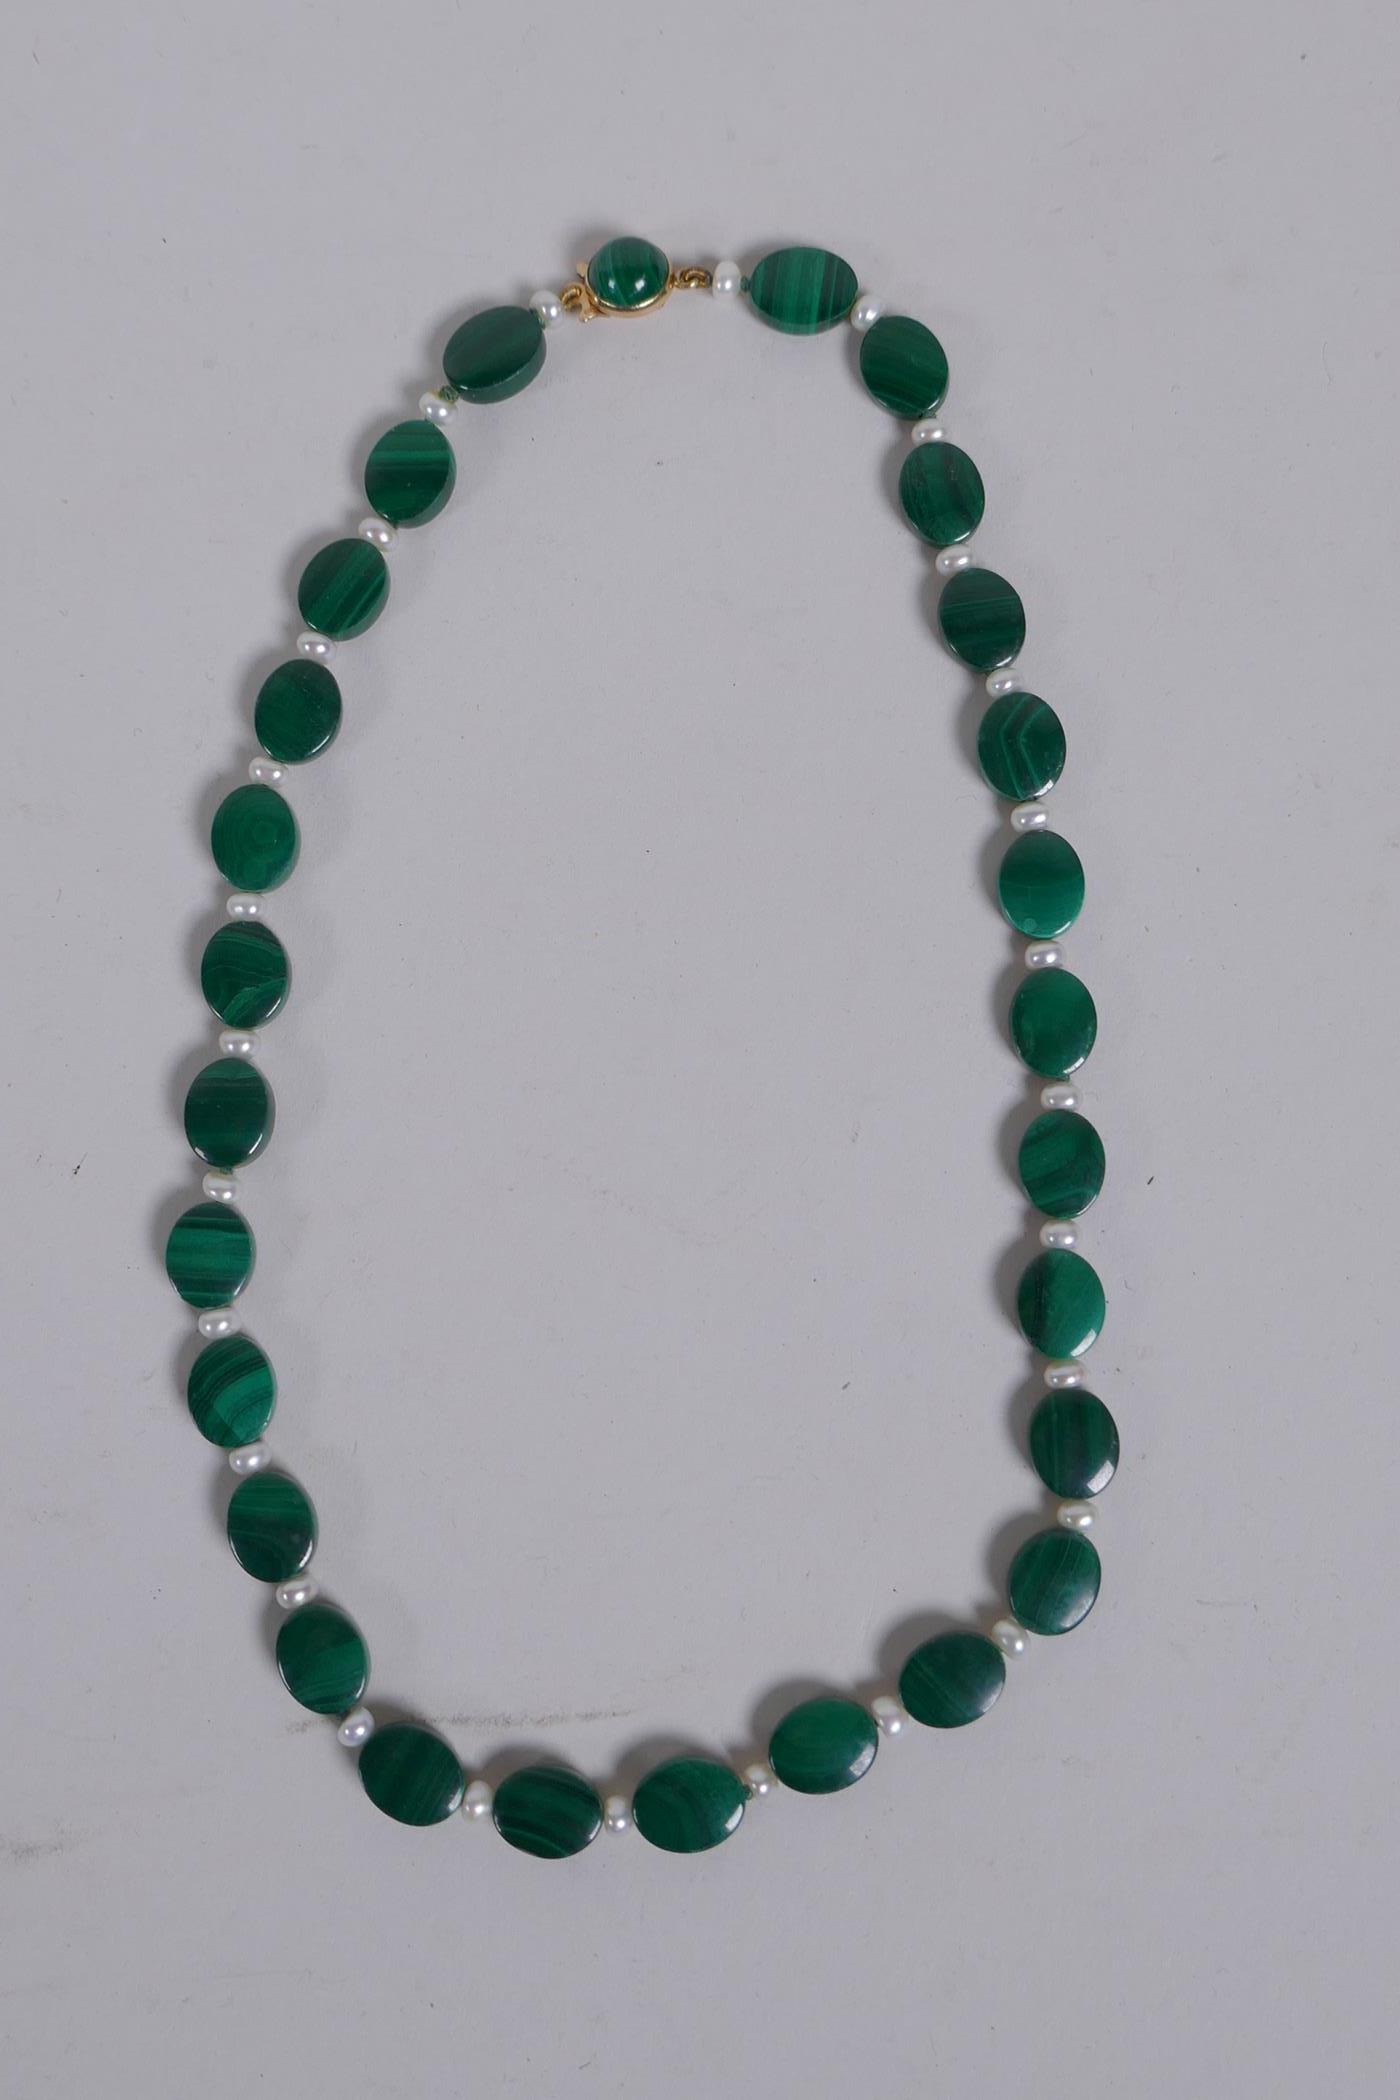 A malachite bead and seed pearl necklace with a 9ct gold clasp, 33cm long